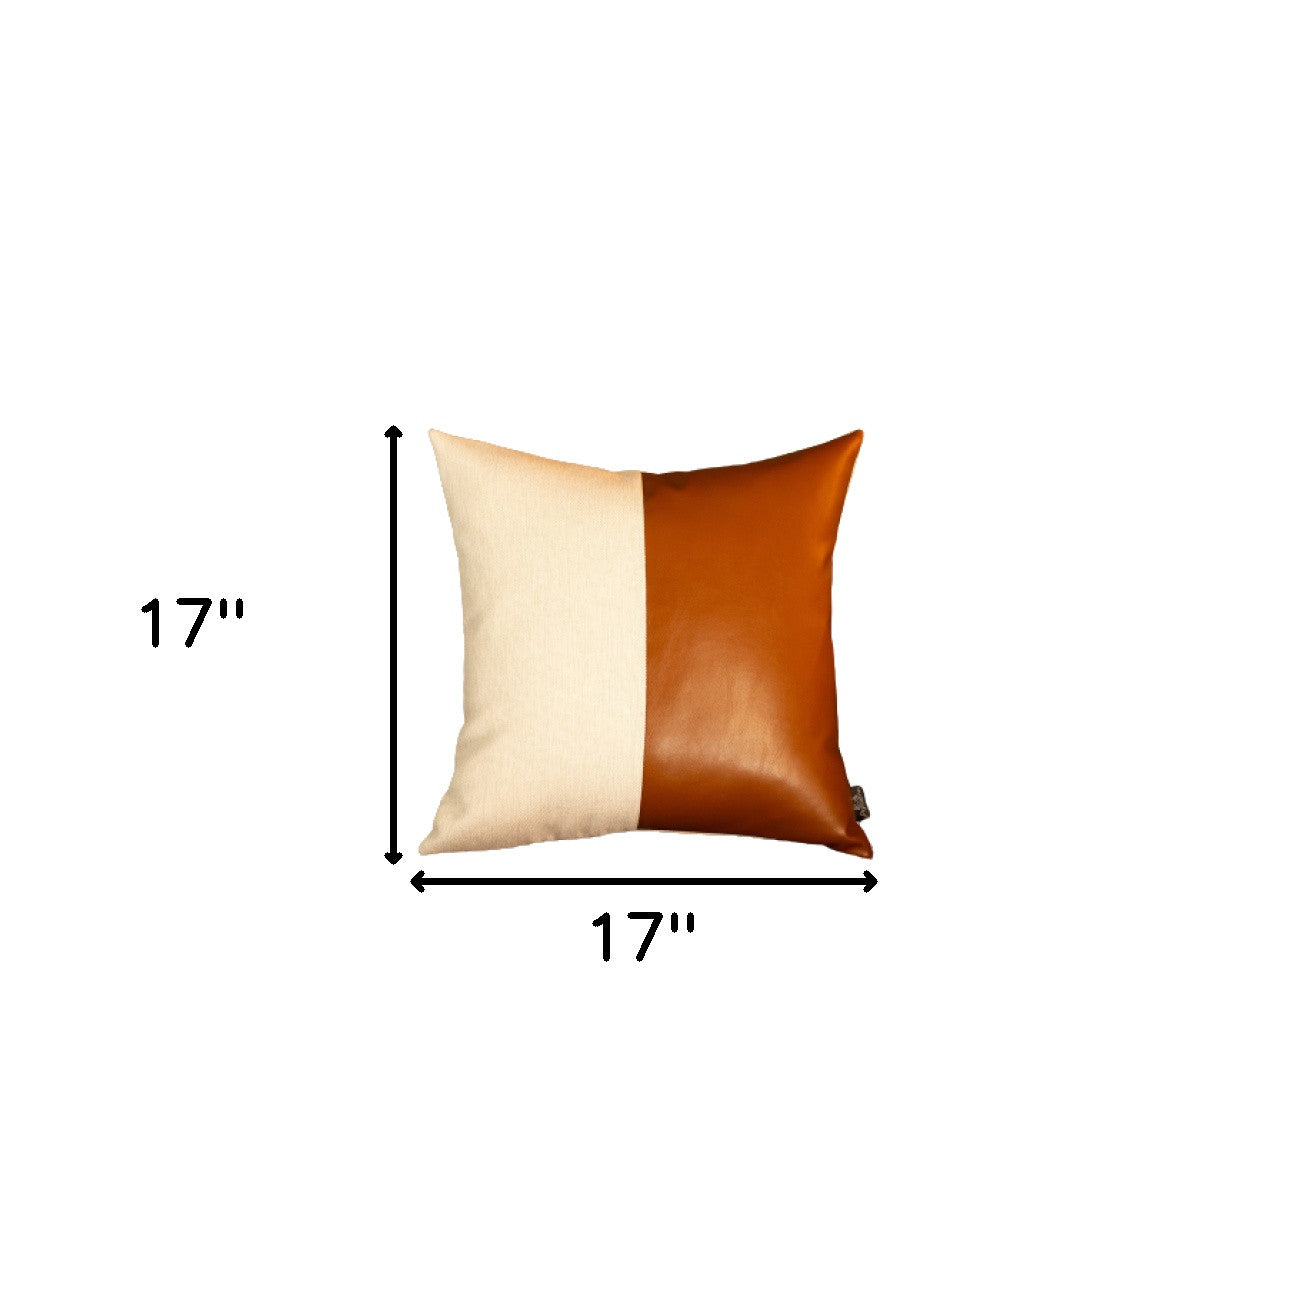 Bisected Brown And White Faux Leather Pillow Cover